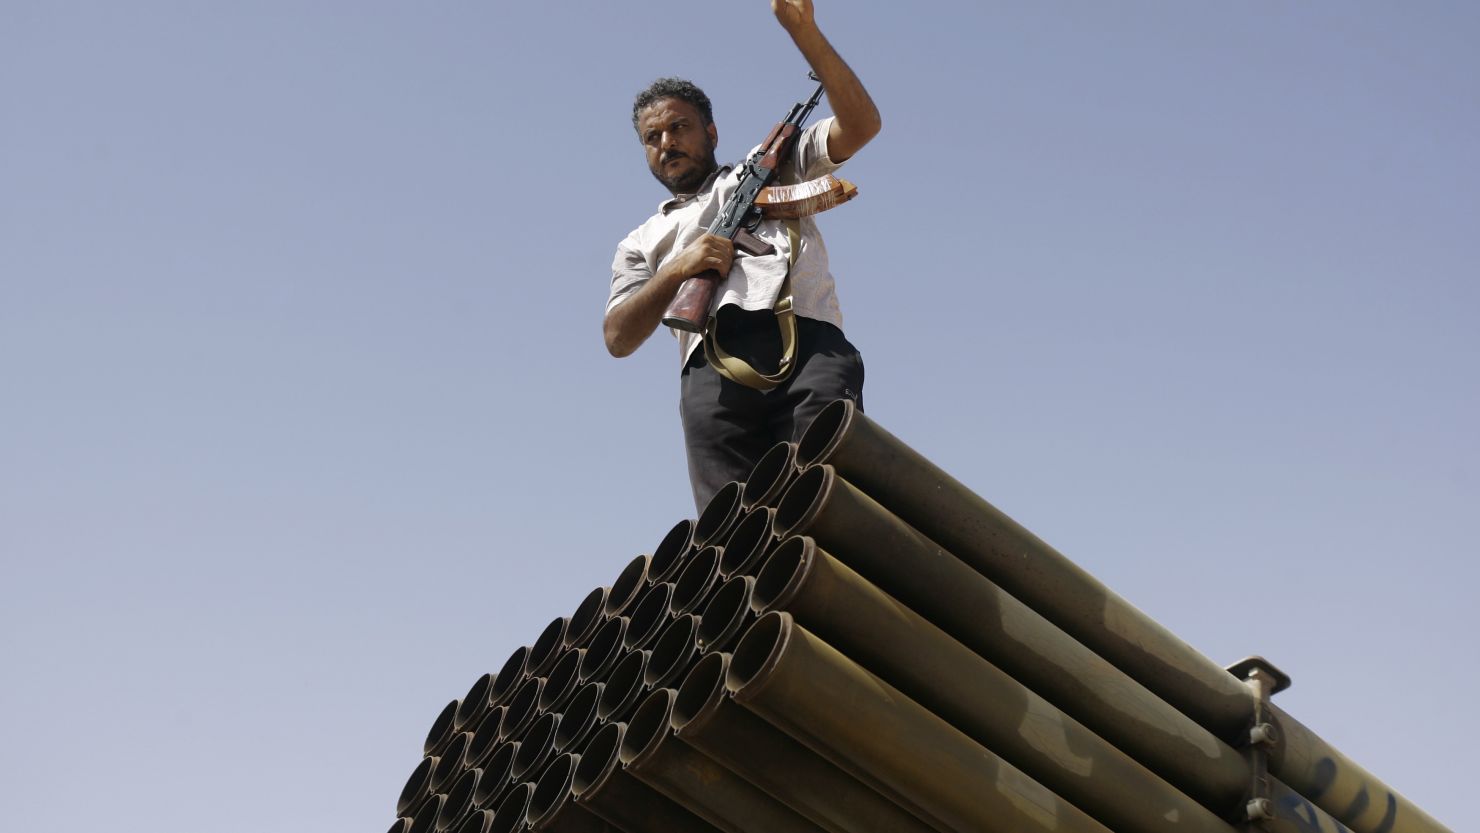 A Libyan NTC fighter poses for a photo on top of a Grad missile launcher on the outskirts of Bani Walid.